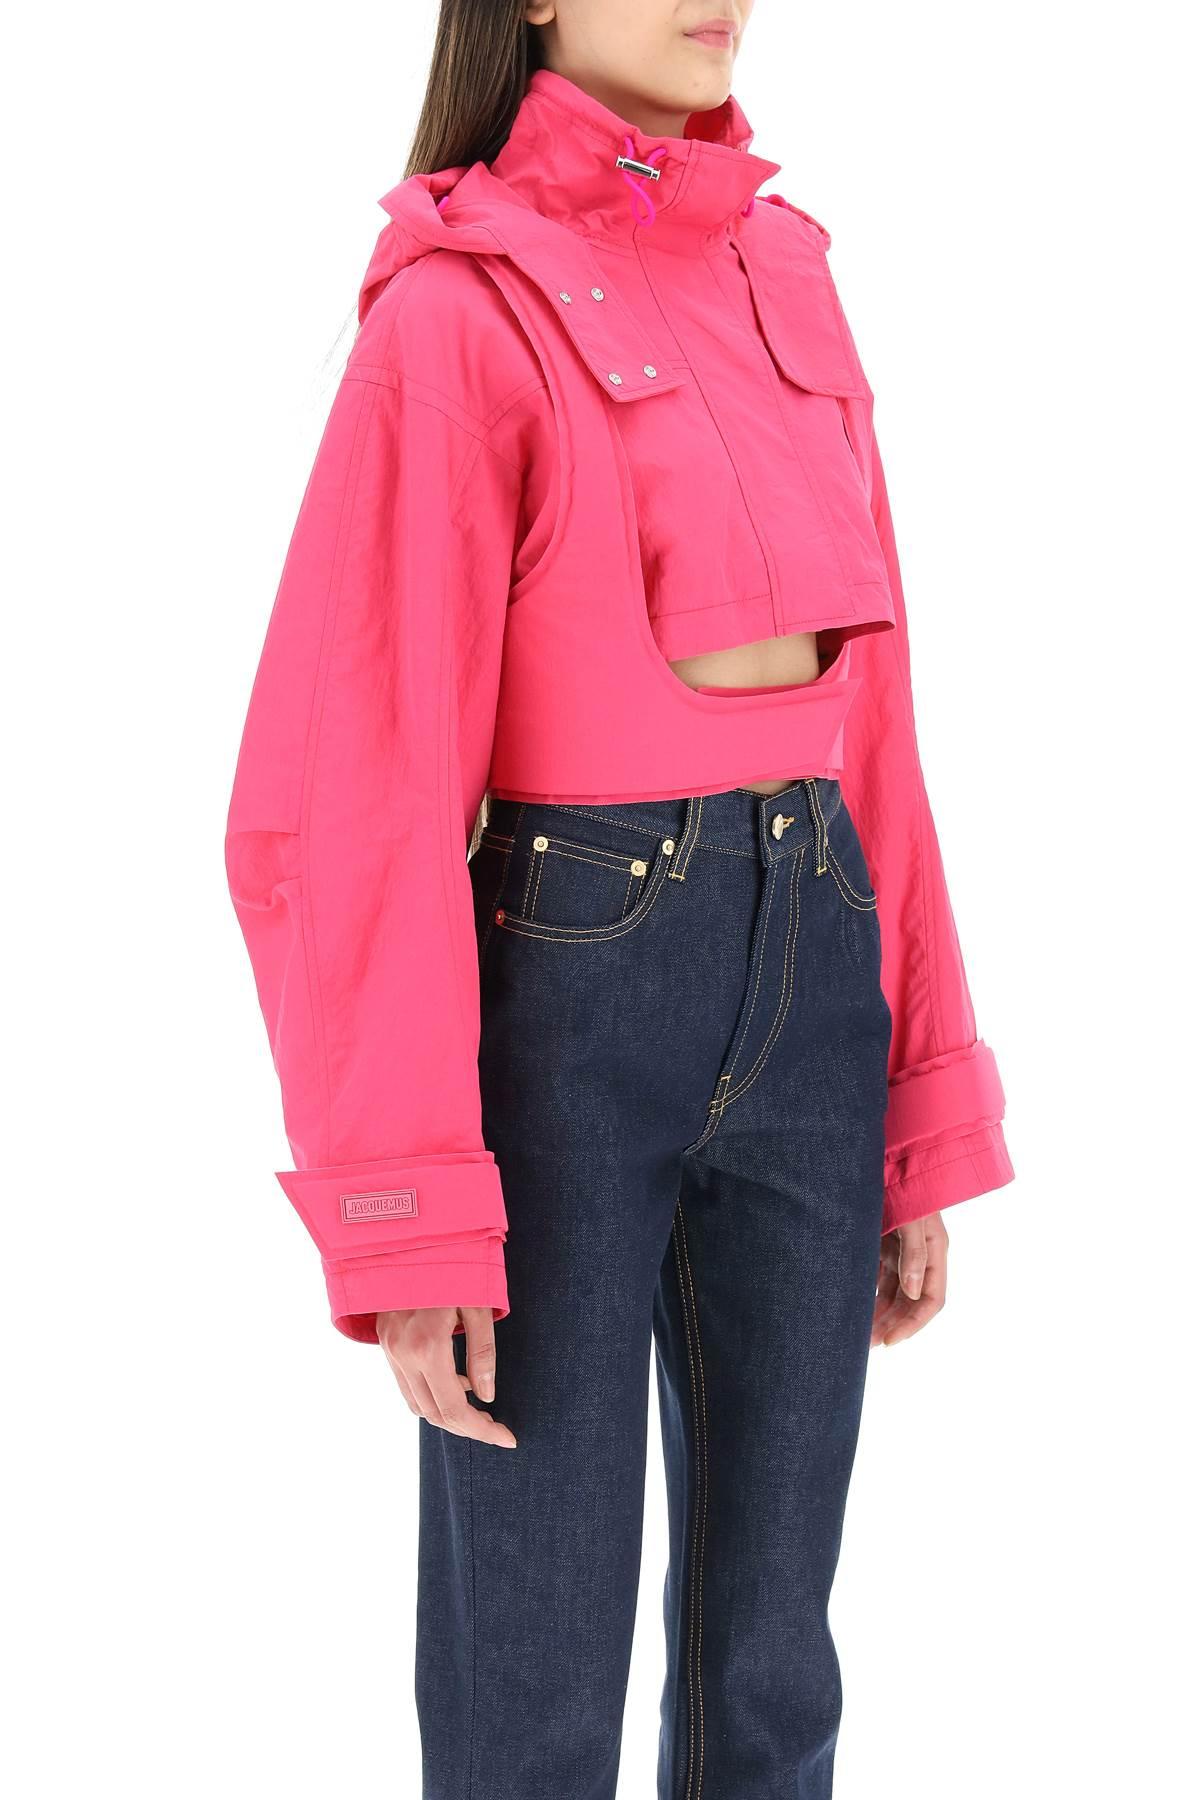 Jacquemus La Parka Fresa Cropped Puffer Jacket in Pink Womens Clothing Jackets Padded and down jackets 